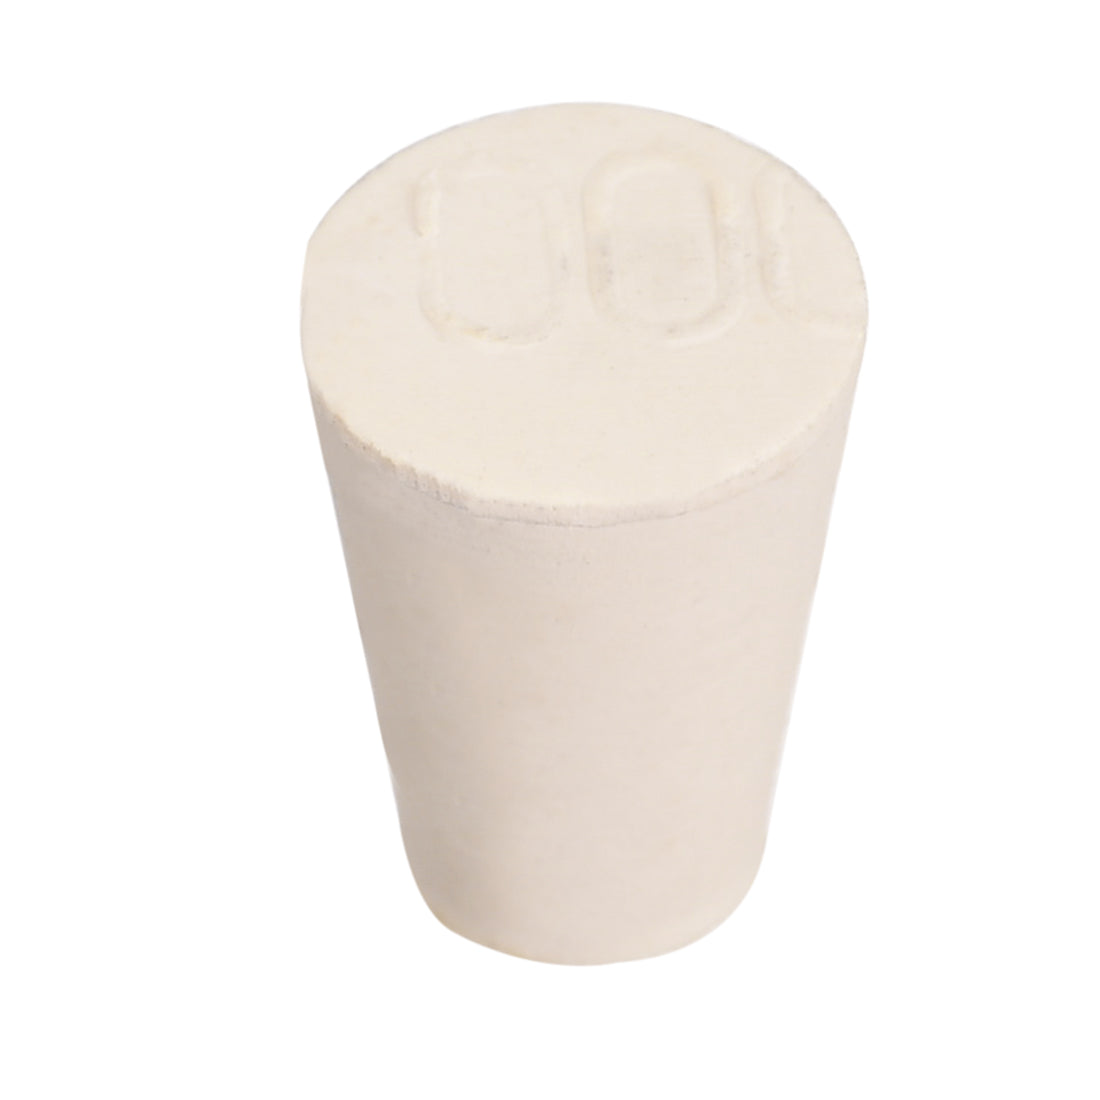 Uxcell Uxcell White Tapered Shaped Solid Rubber Stopper for Lab Tube Stopper Size 000 20Pcs